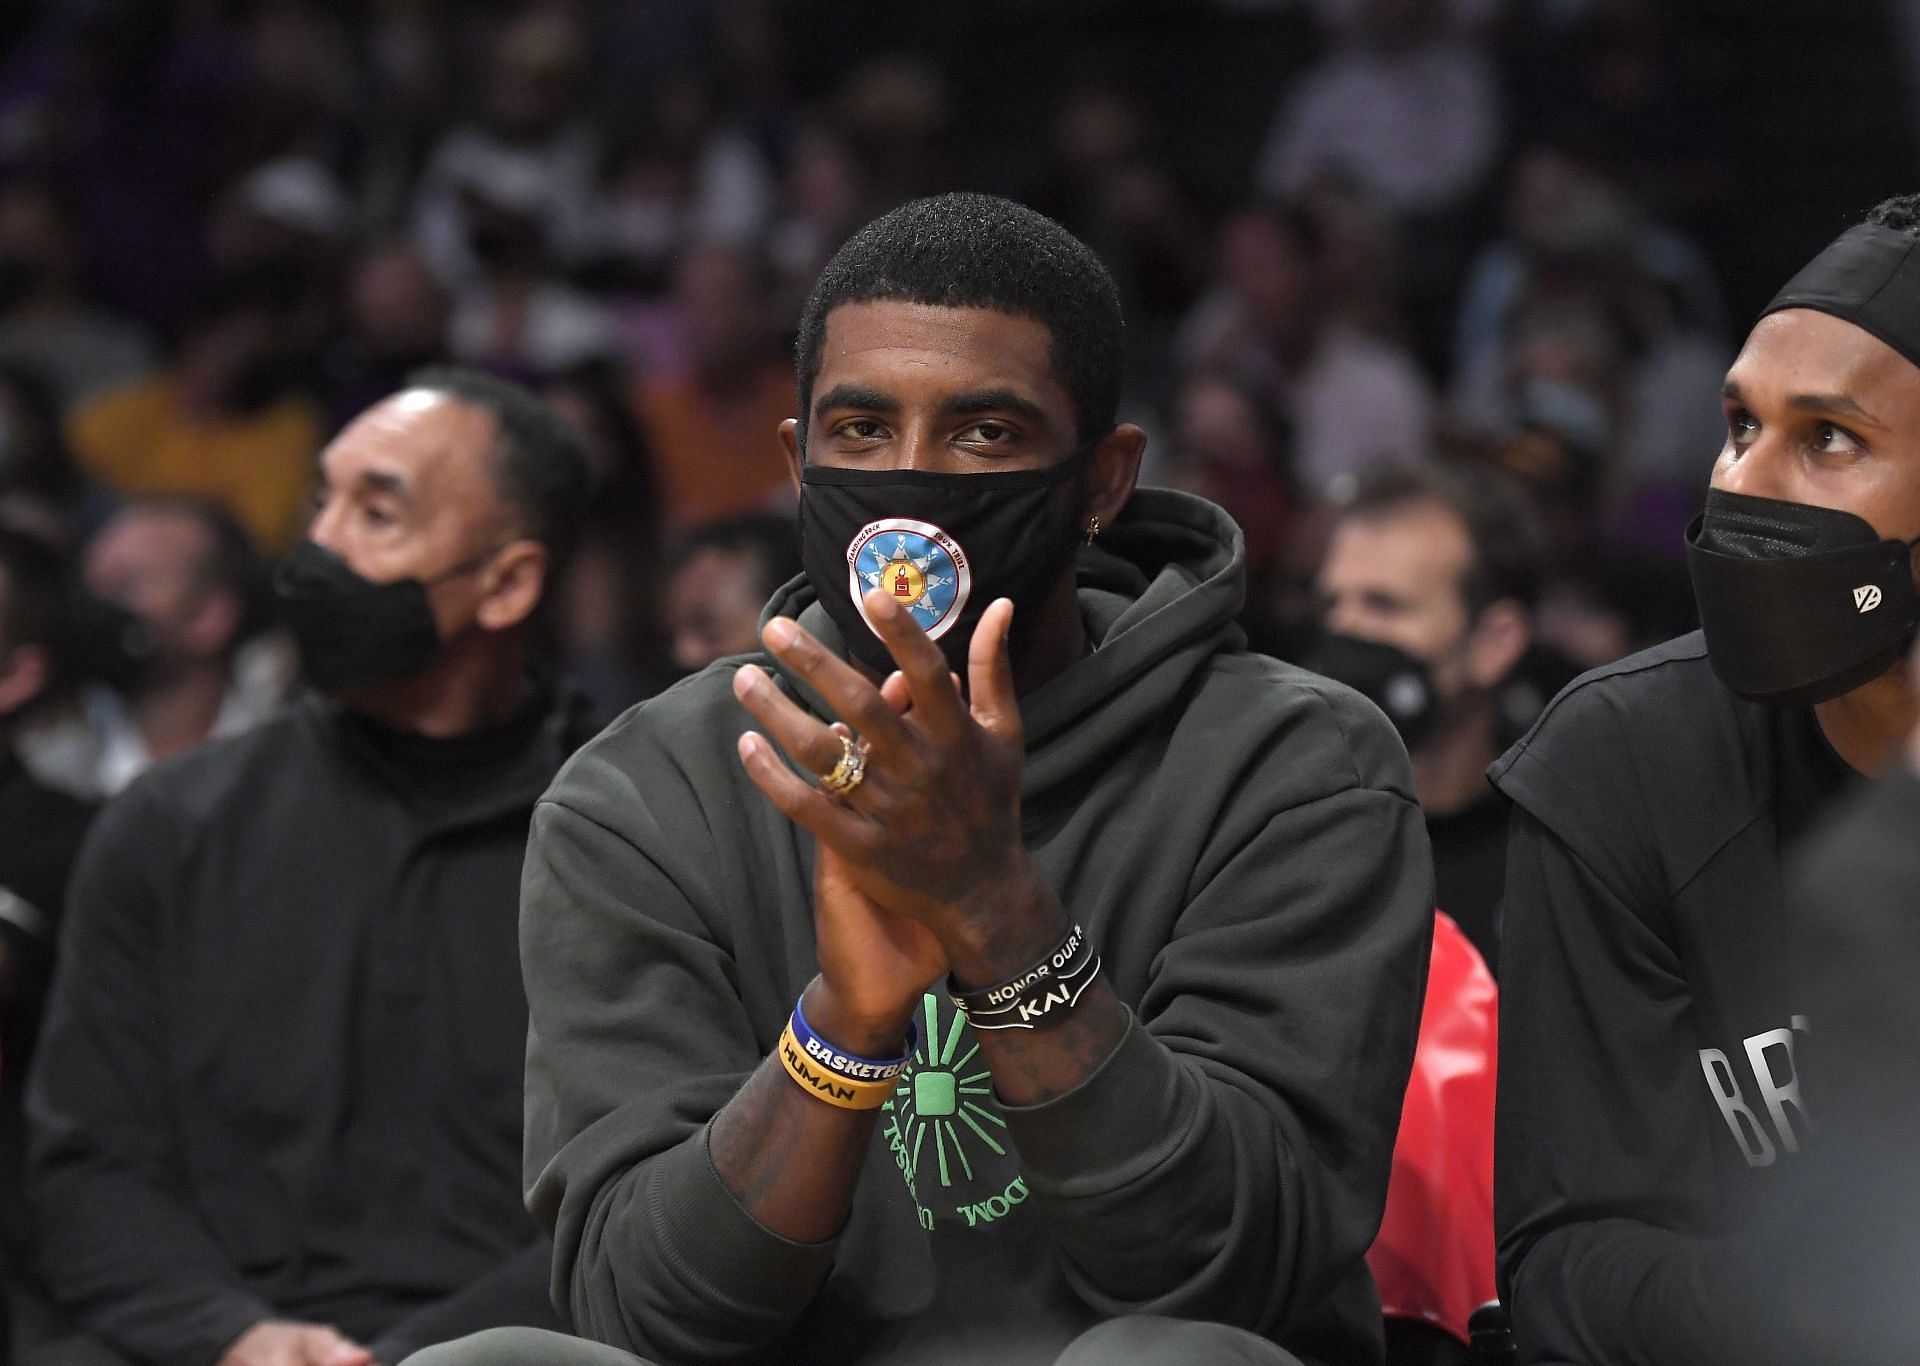 Kyrie Irving continues to grab the headlines as the Brooklyn Nets opened their NBA season with a loss to the Milwaukee Bucks